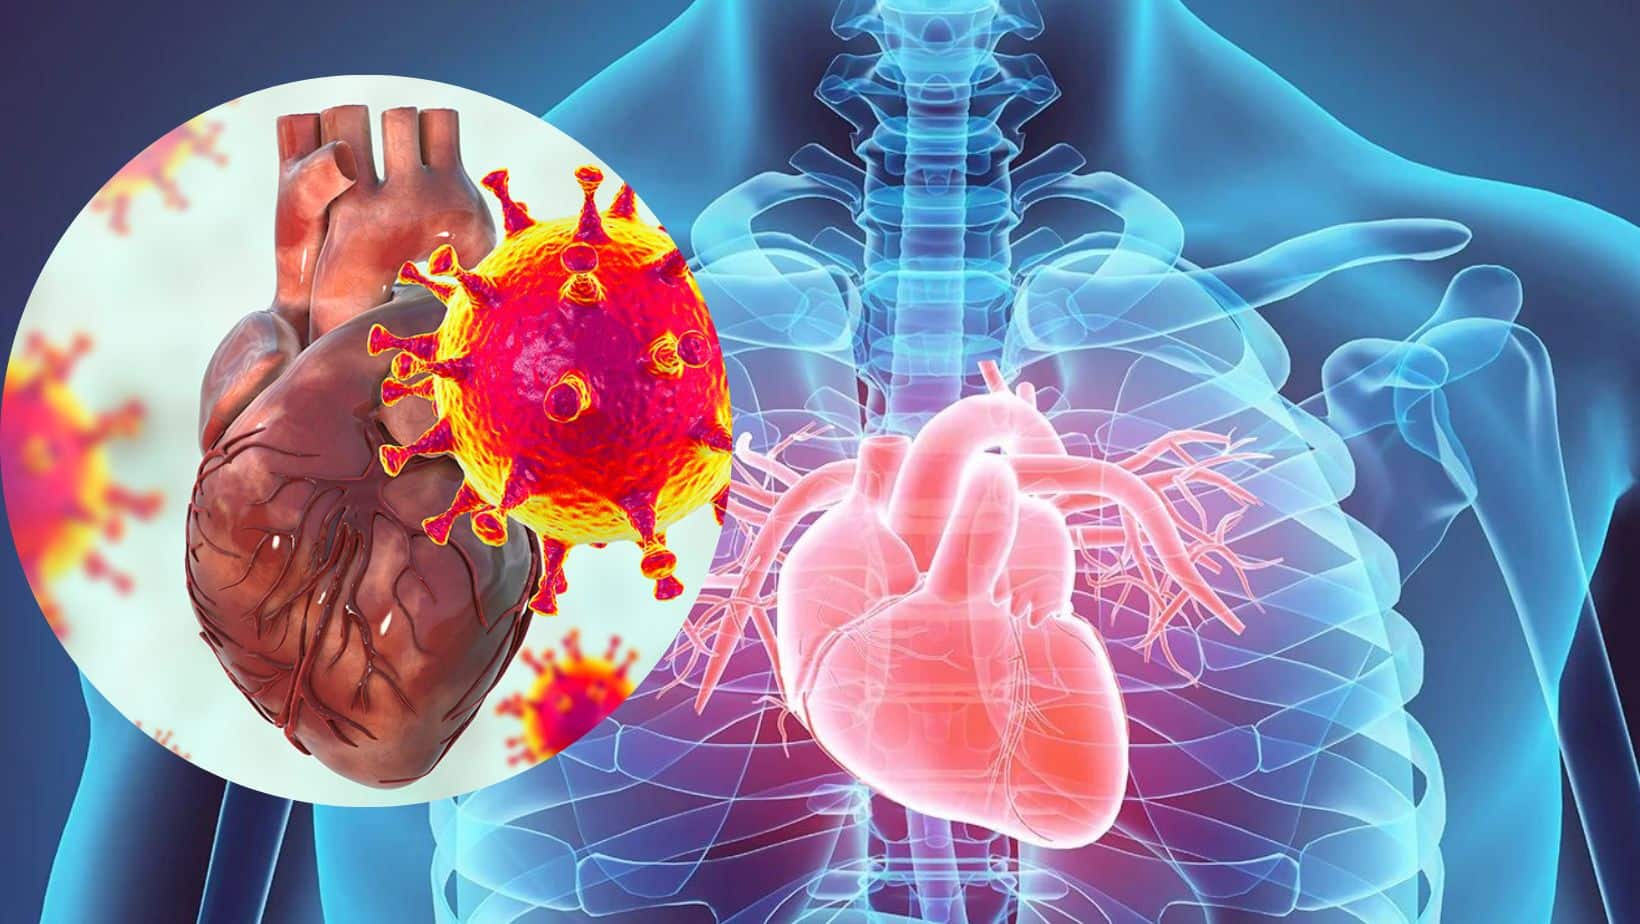 COVID Heart: Chest Discomfort And Other Signs COVID-19 Has Damaged Your Heart